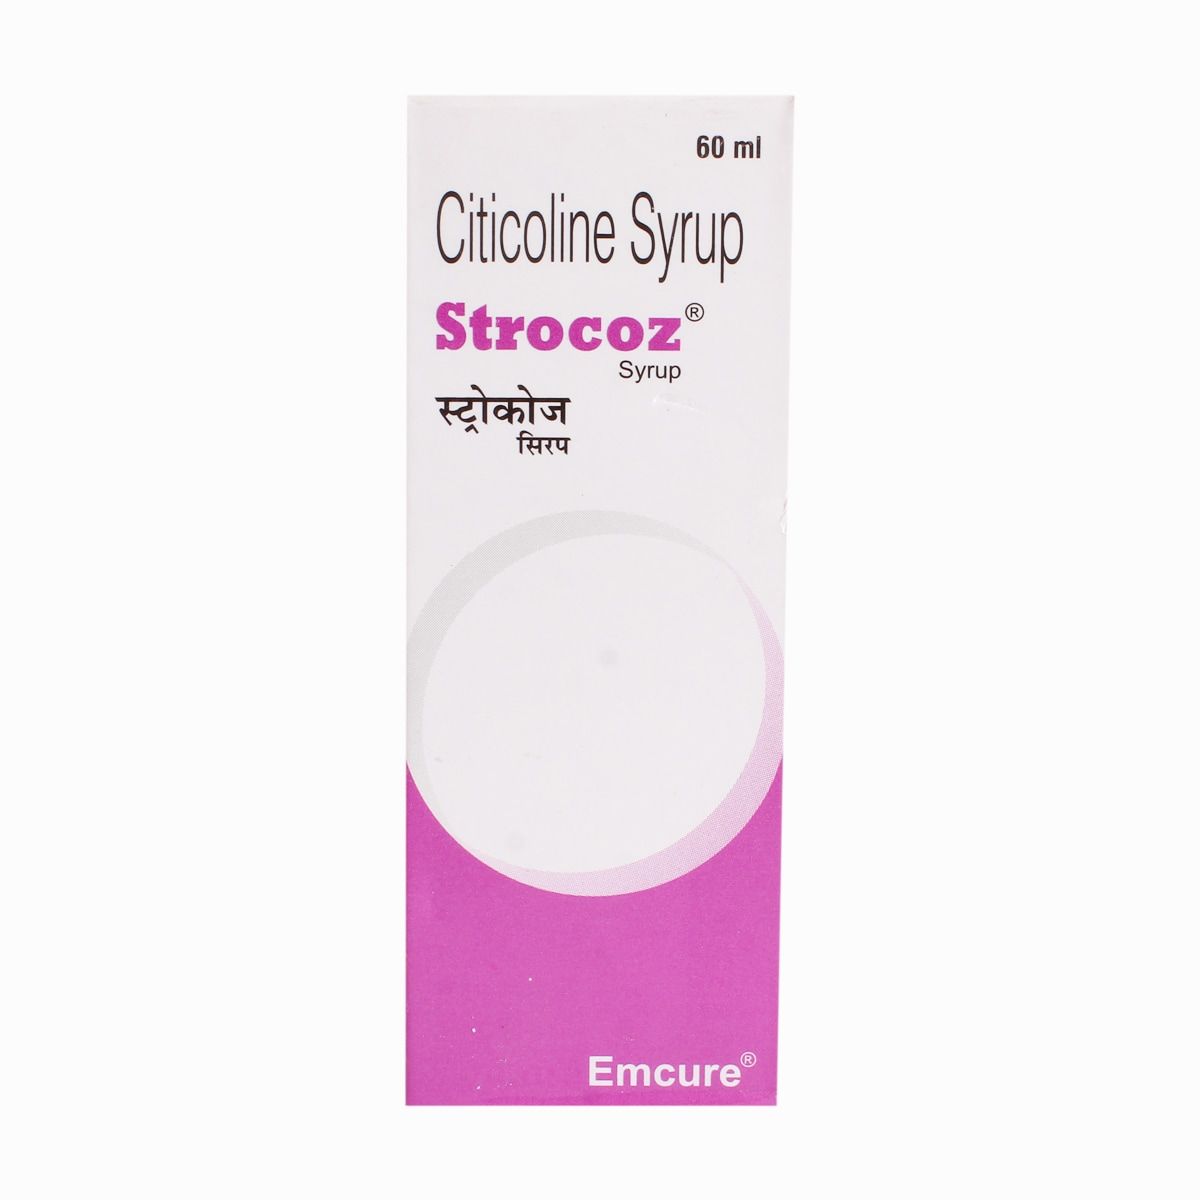 Strocoz Syrup 60 ml, Pack of 1 SYRUP